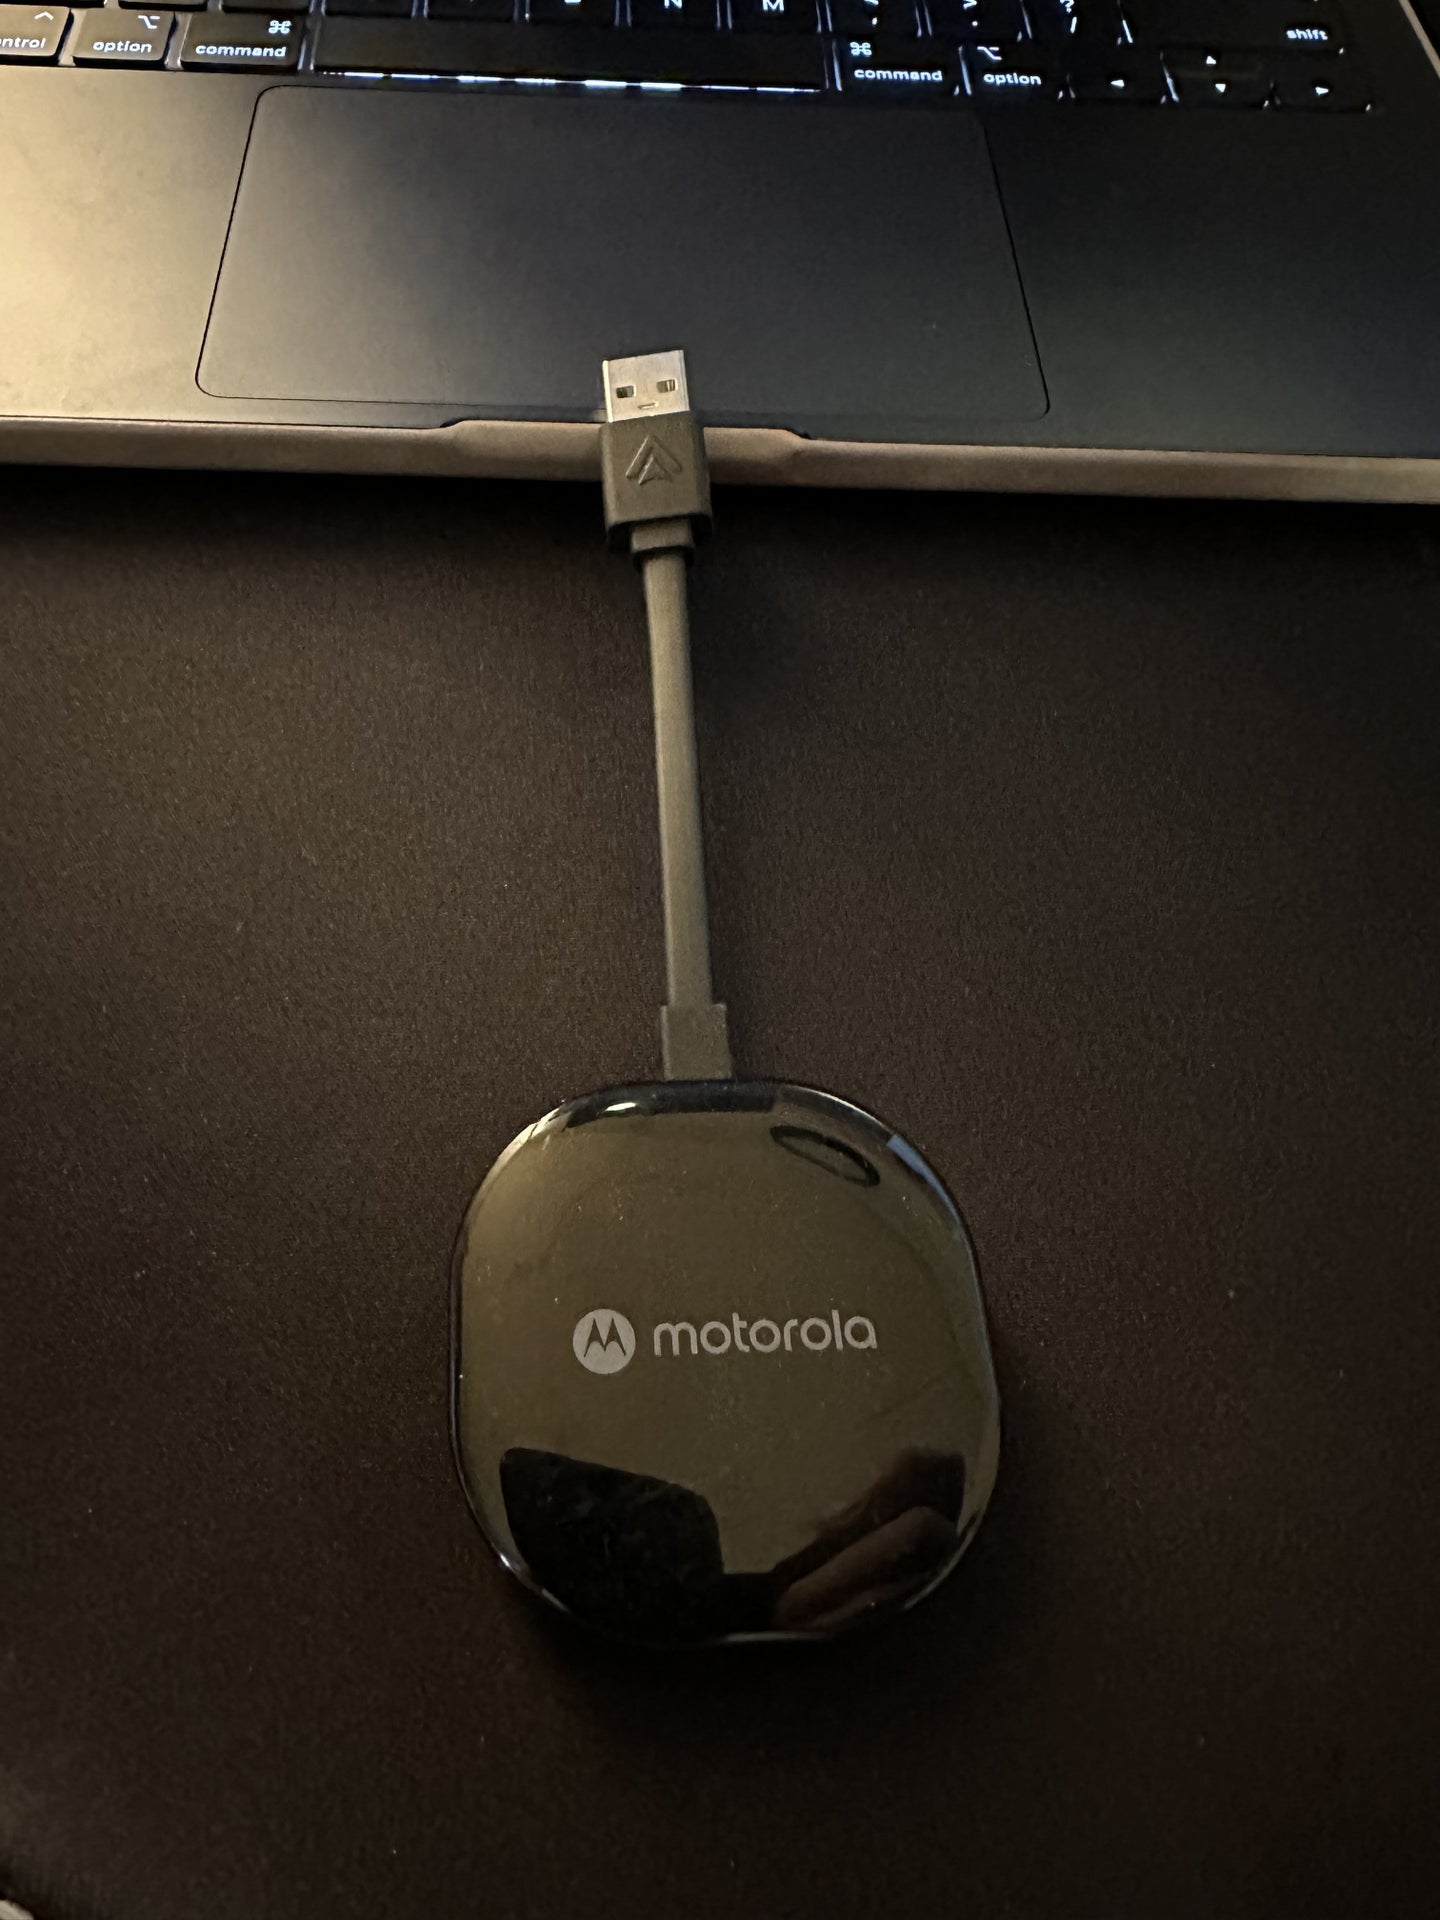 Setup Your Android Auto with Motorola MA1 Wireless Car Adapter